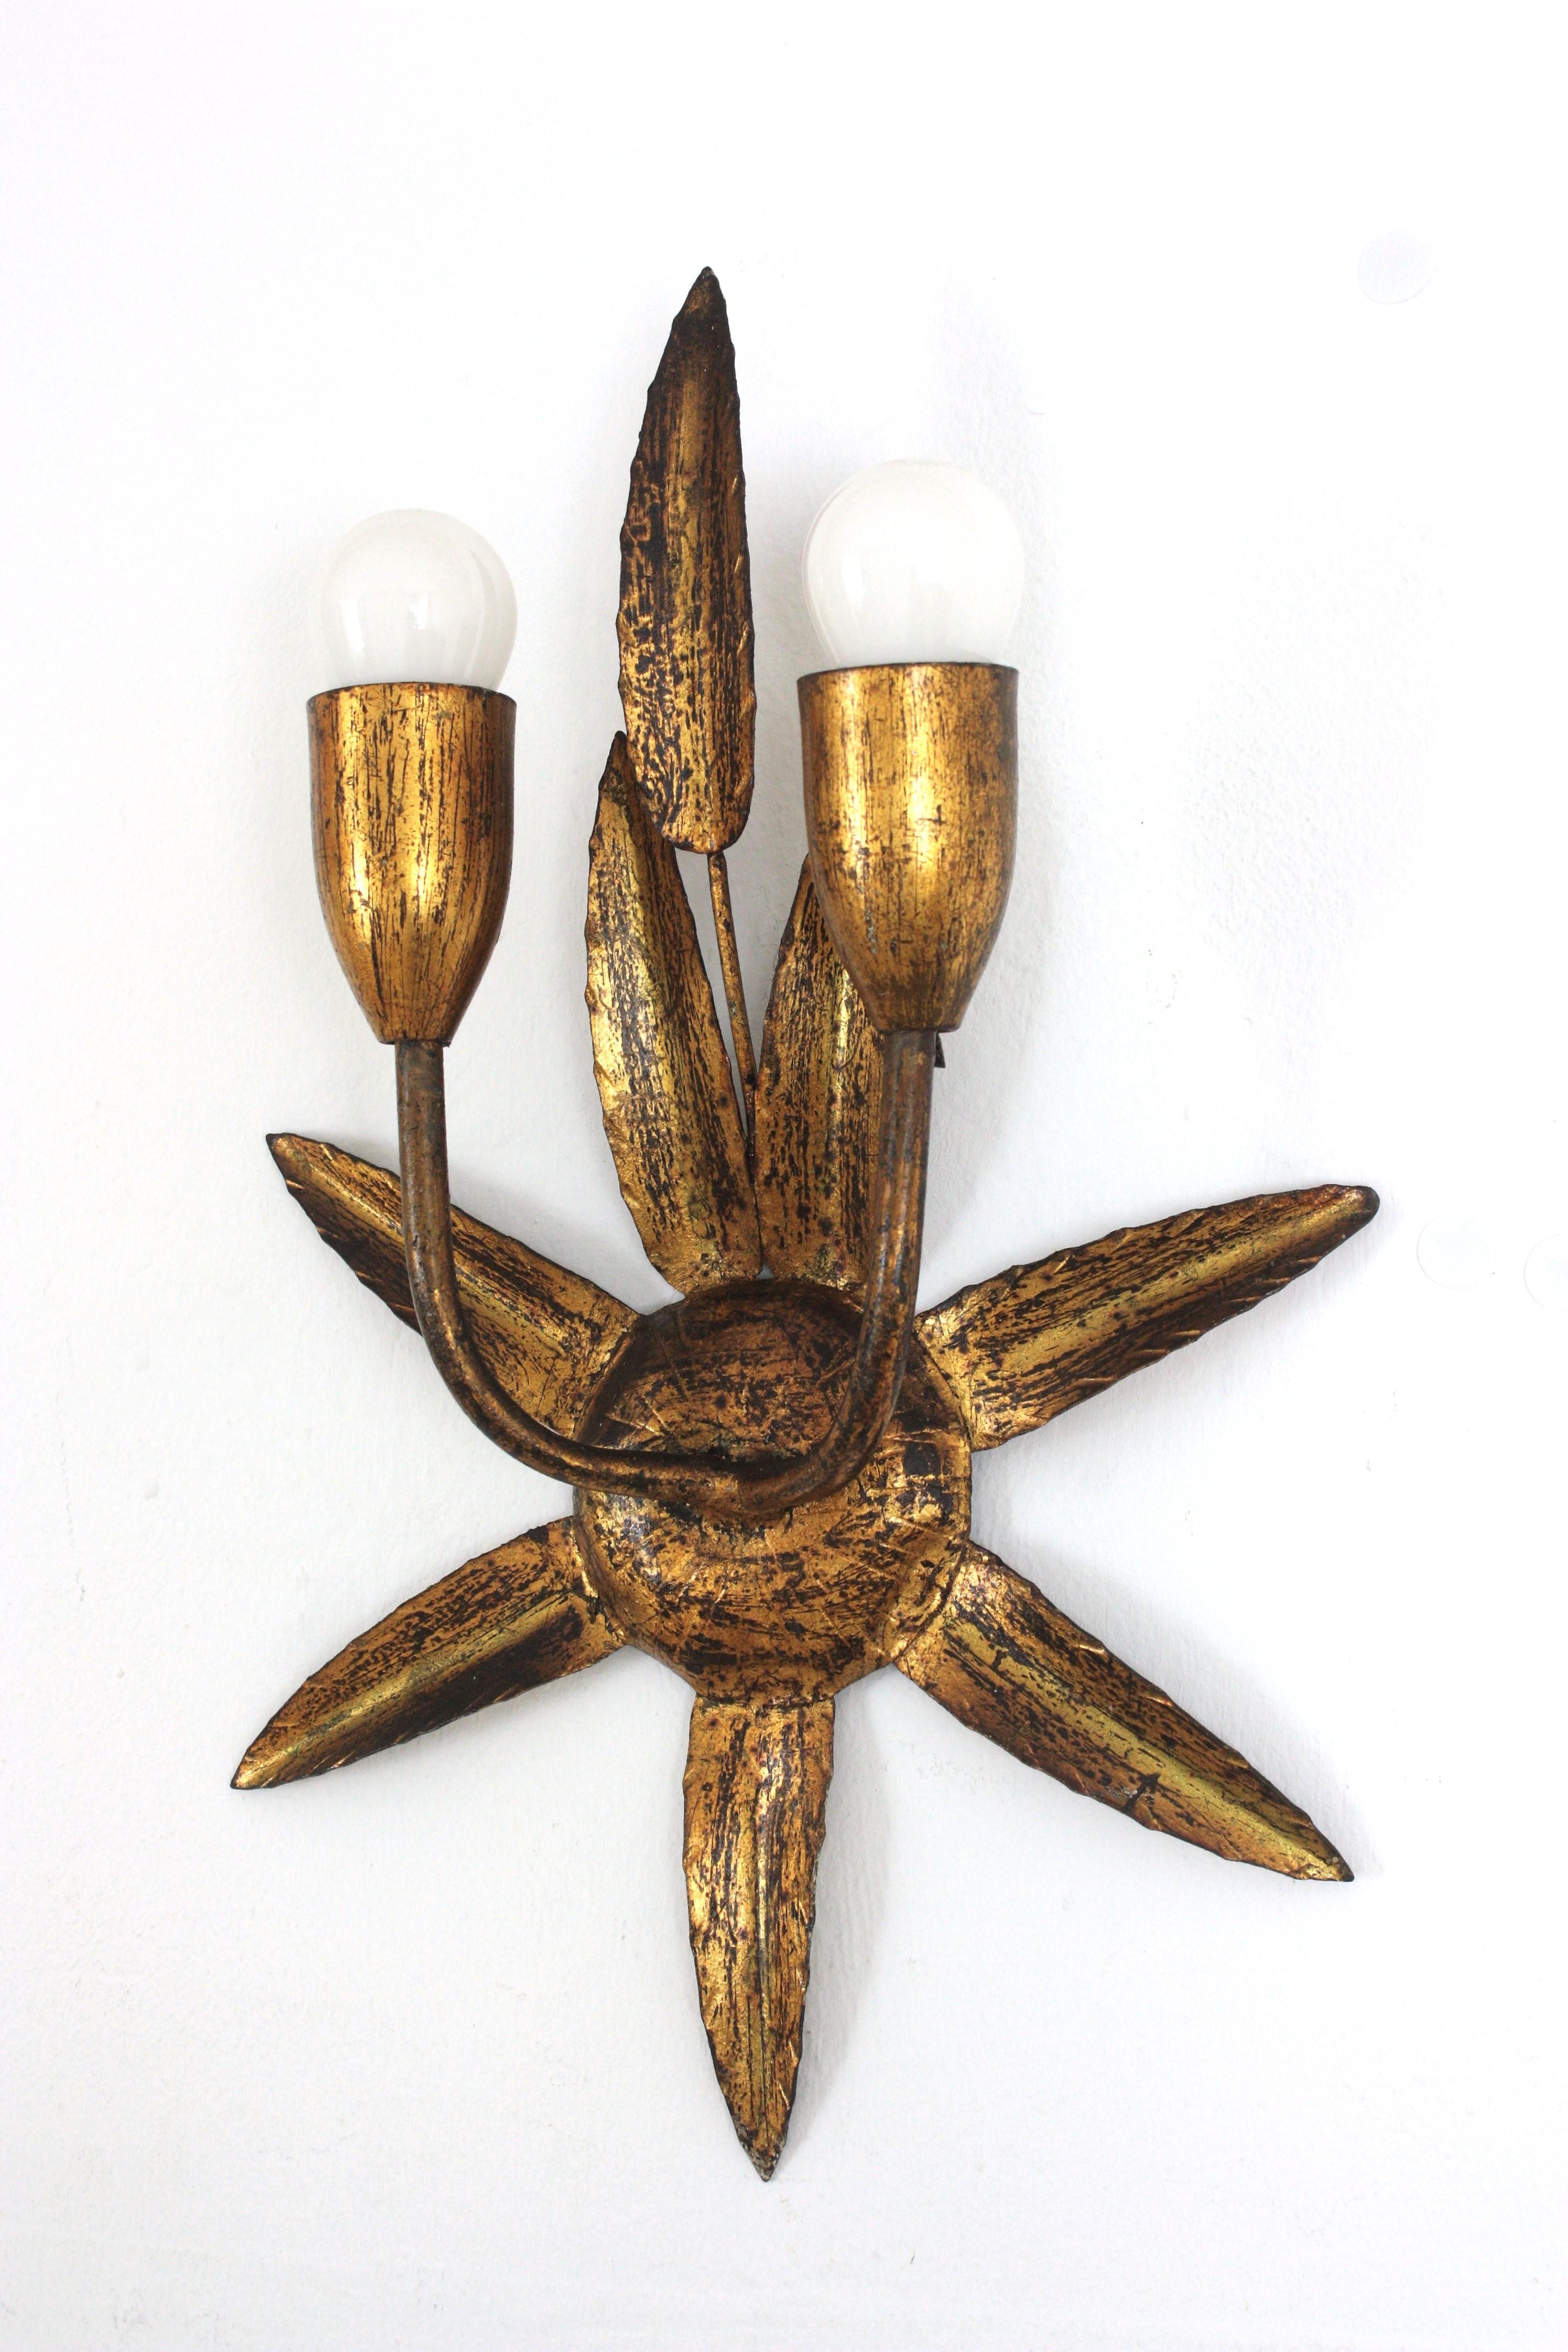 Spanish Gilt Iron Wall Sconce with Foliage Design and Starburst Backplate, 1950s For Sale 1